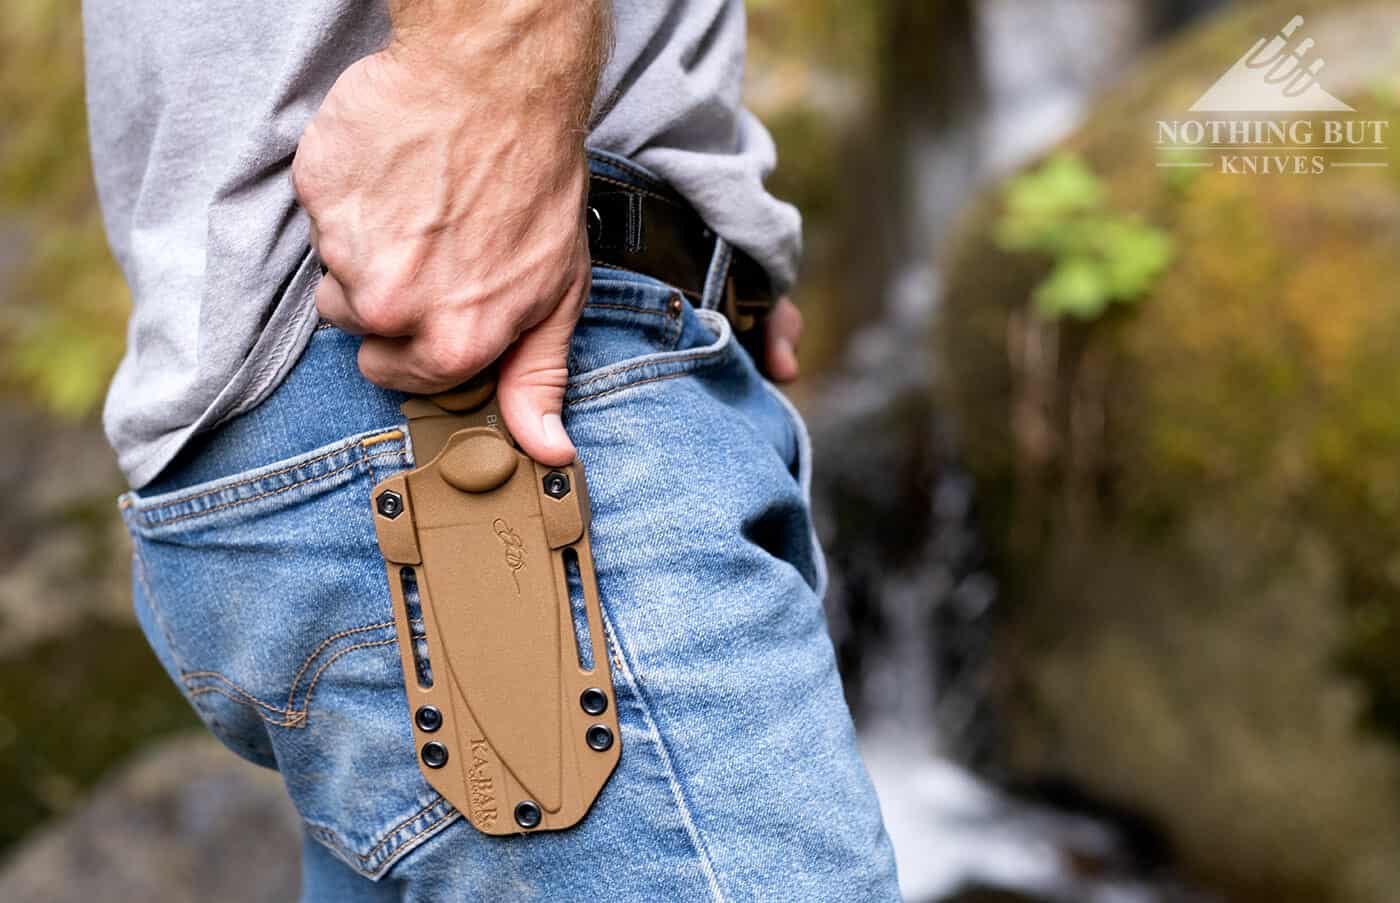 A man drawing the Ka-Bar Becker BK18 Harpoon survival knife from it's sheath while hiking outdoors.